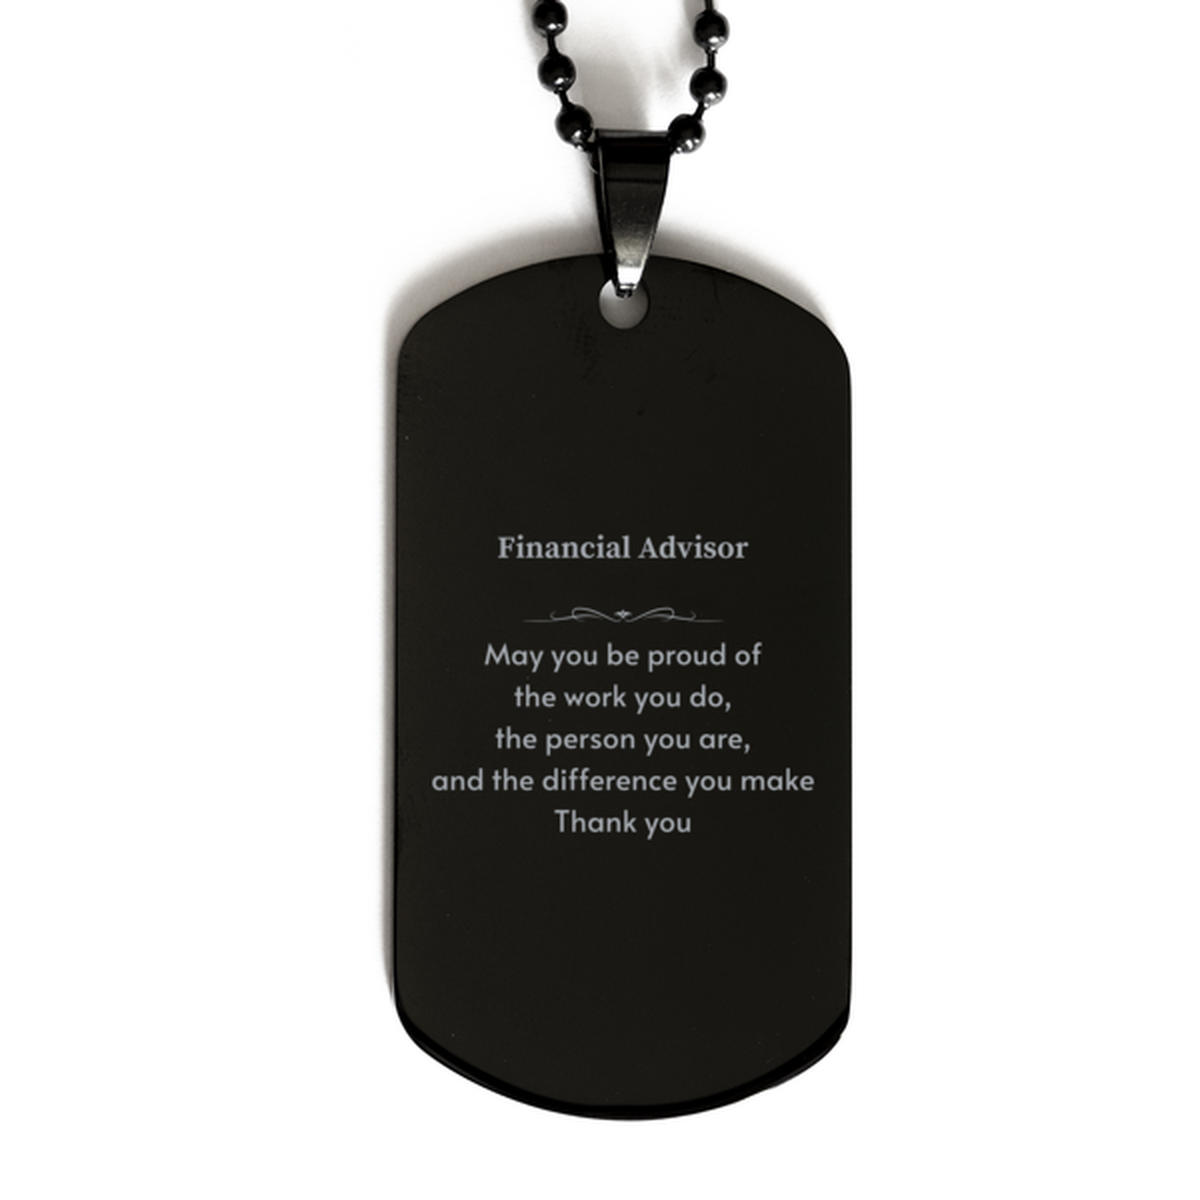 Heartwarming Black Dog Tag Retirement Coworkers Gifts for Financial Advisor, Financial Advisor May You be proud of the work you do, the person you are Gifts for Boss Men Women Friends